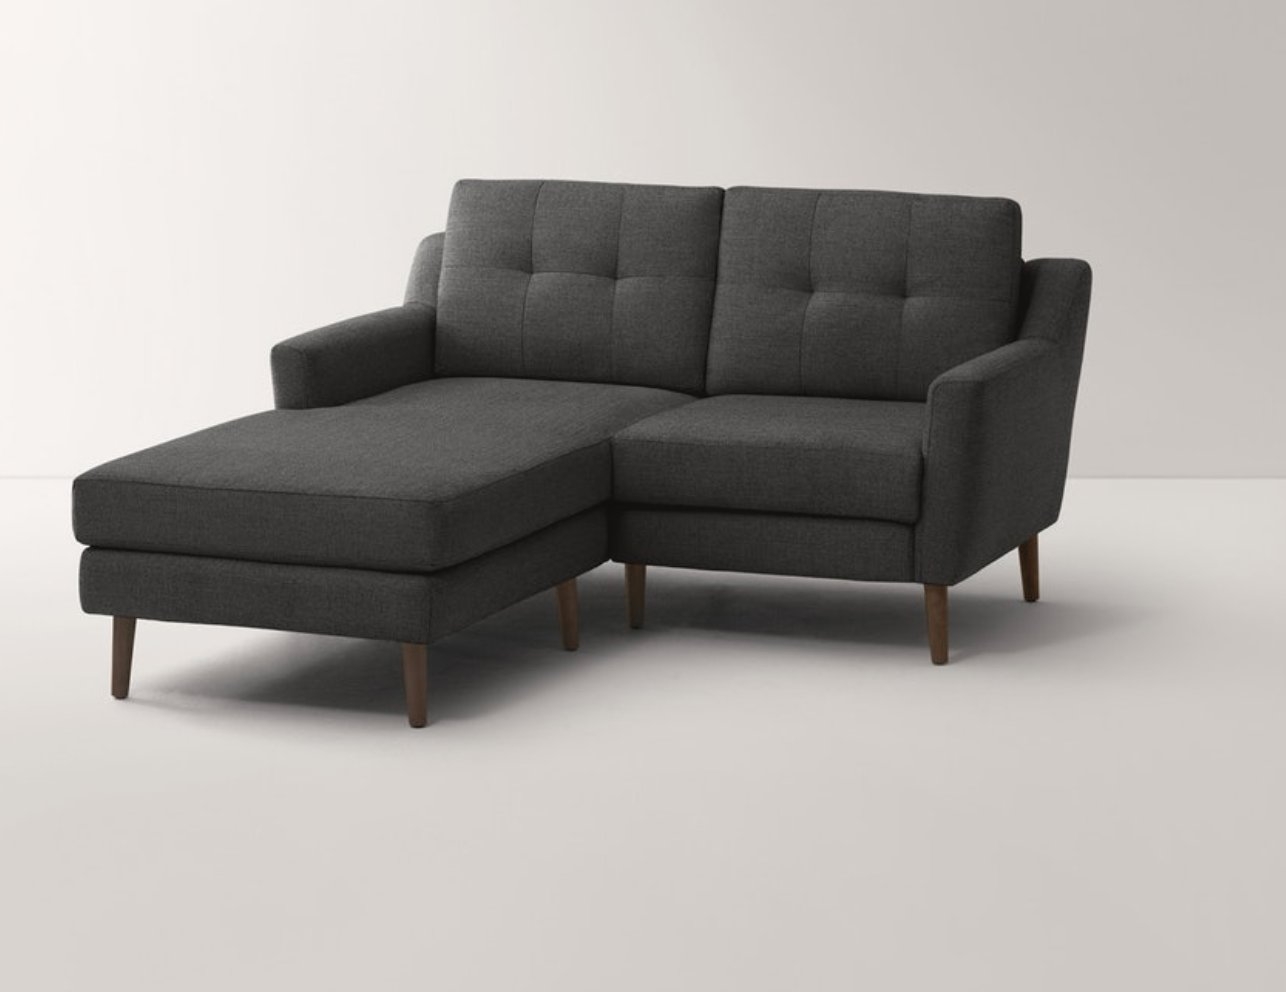 Chaise Loveseat in Charcoal Fabric - Darkwood Legs - Image 0